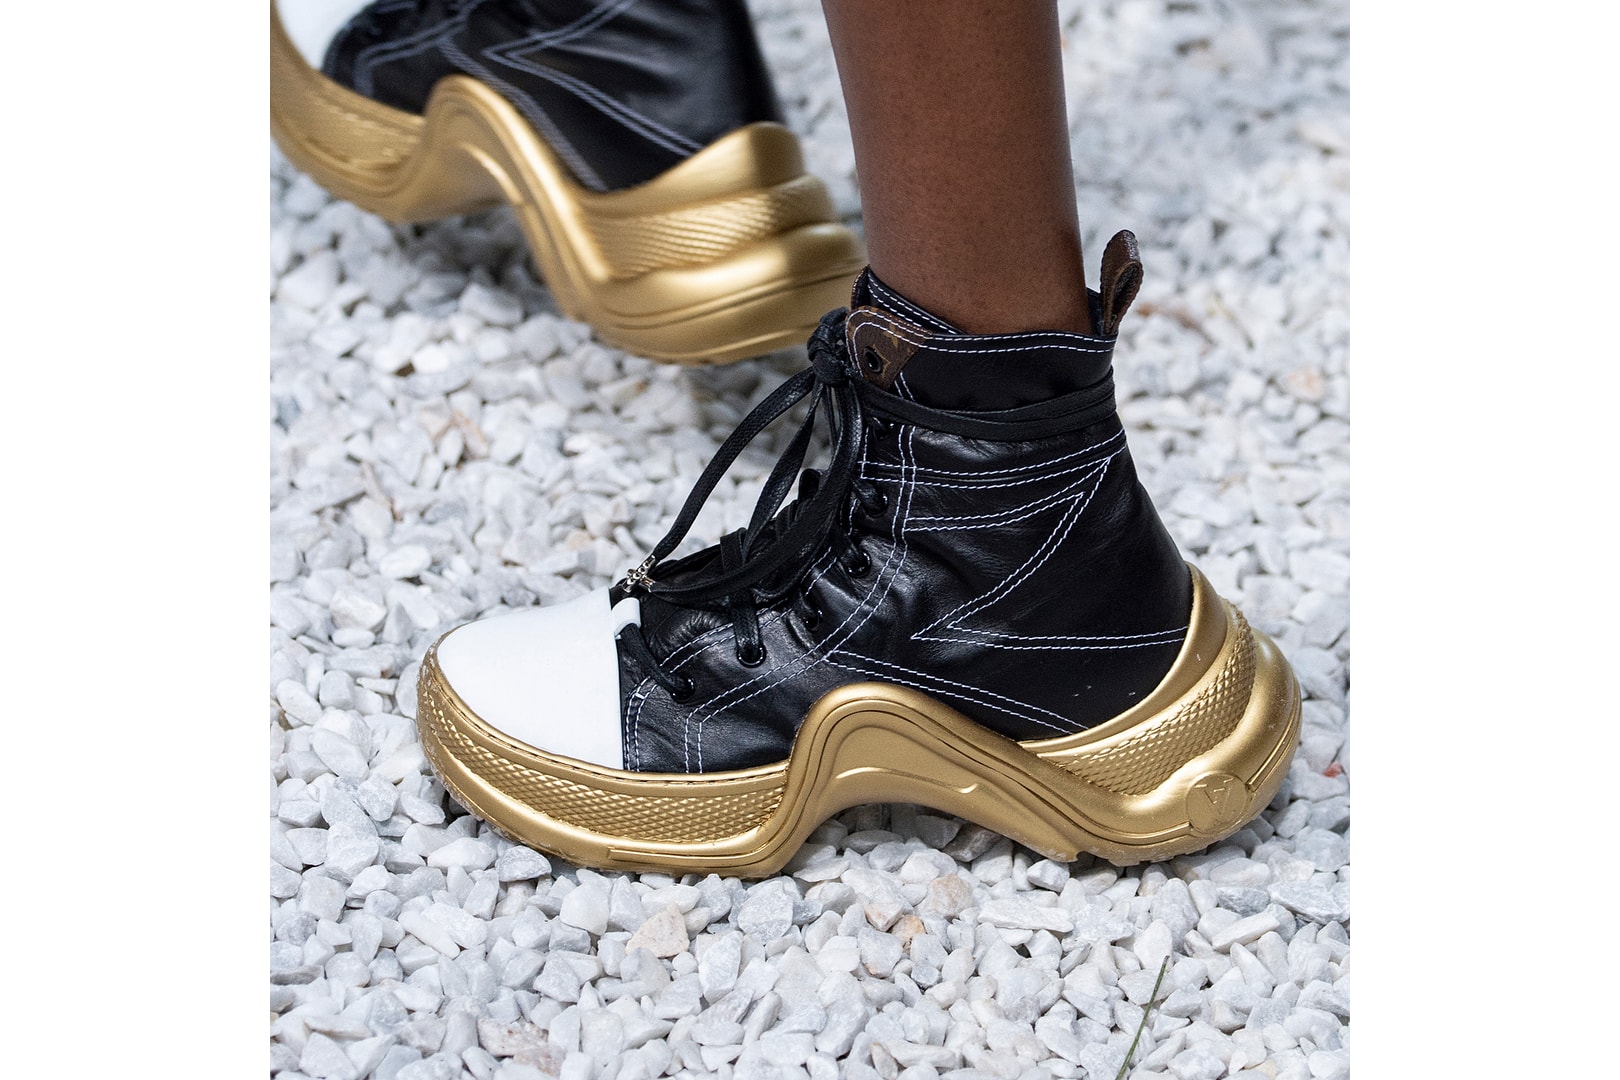 Louis Vuitton Archlight High-Top Leather Monogram Sneakers Cruise 2019